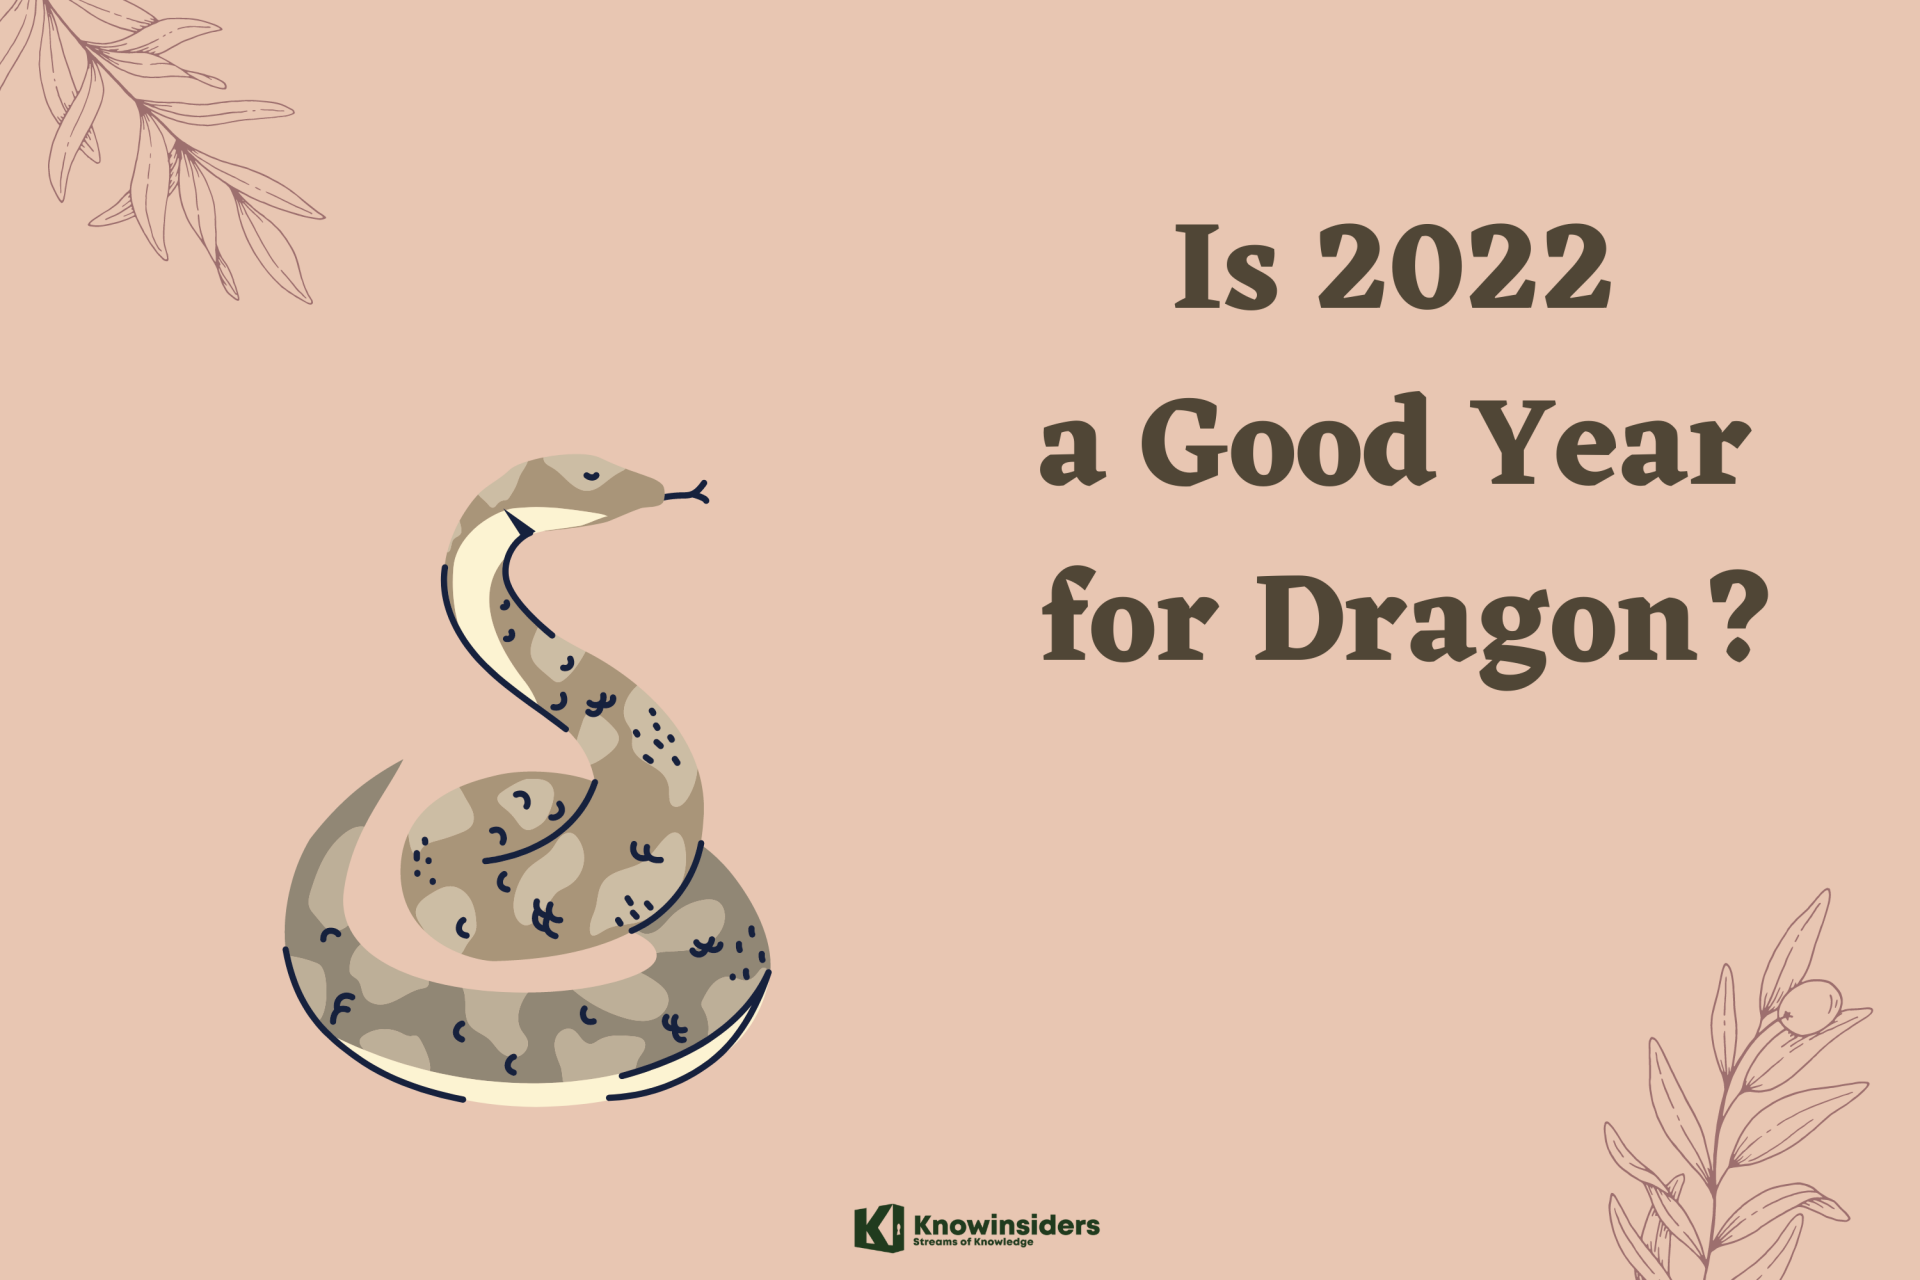 Is 2022 a Good Year for Snake?